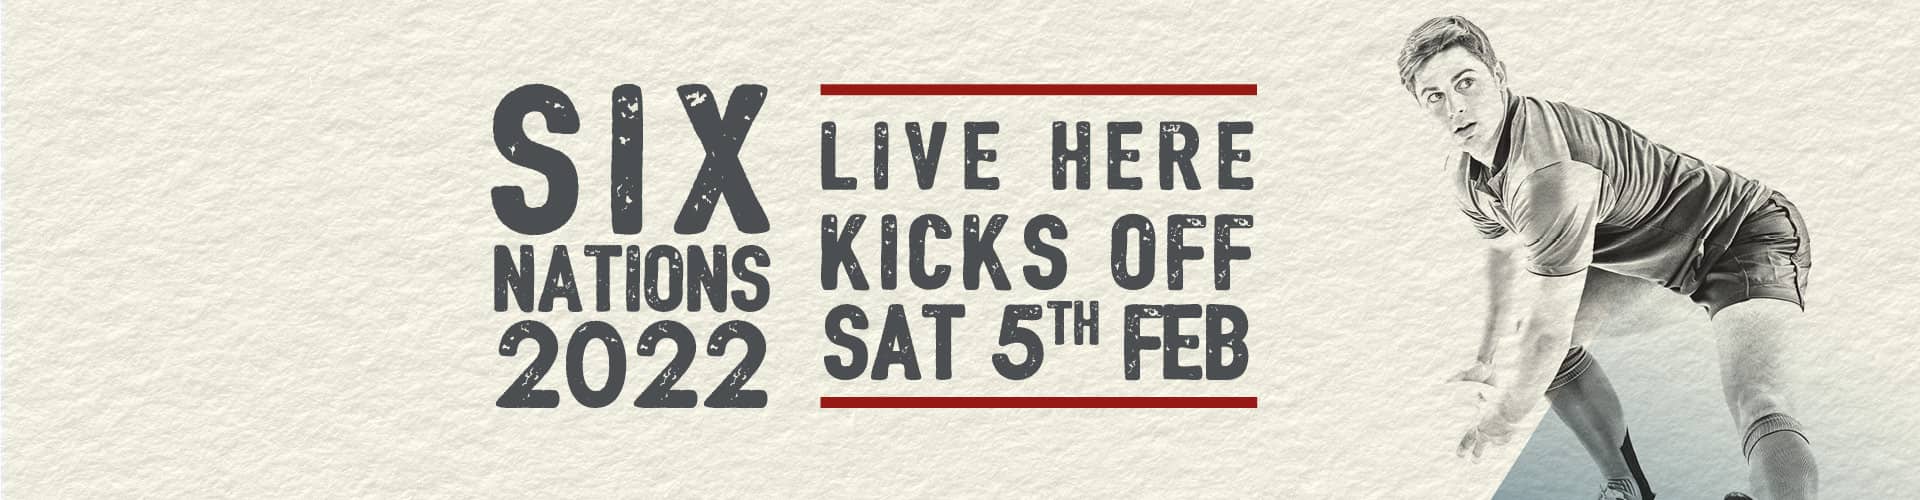 Watch the Six Nations live at Swan Inn